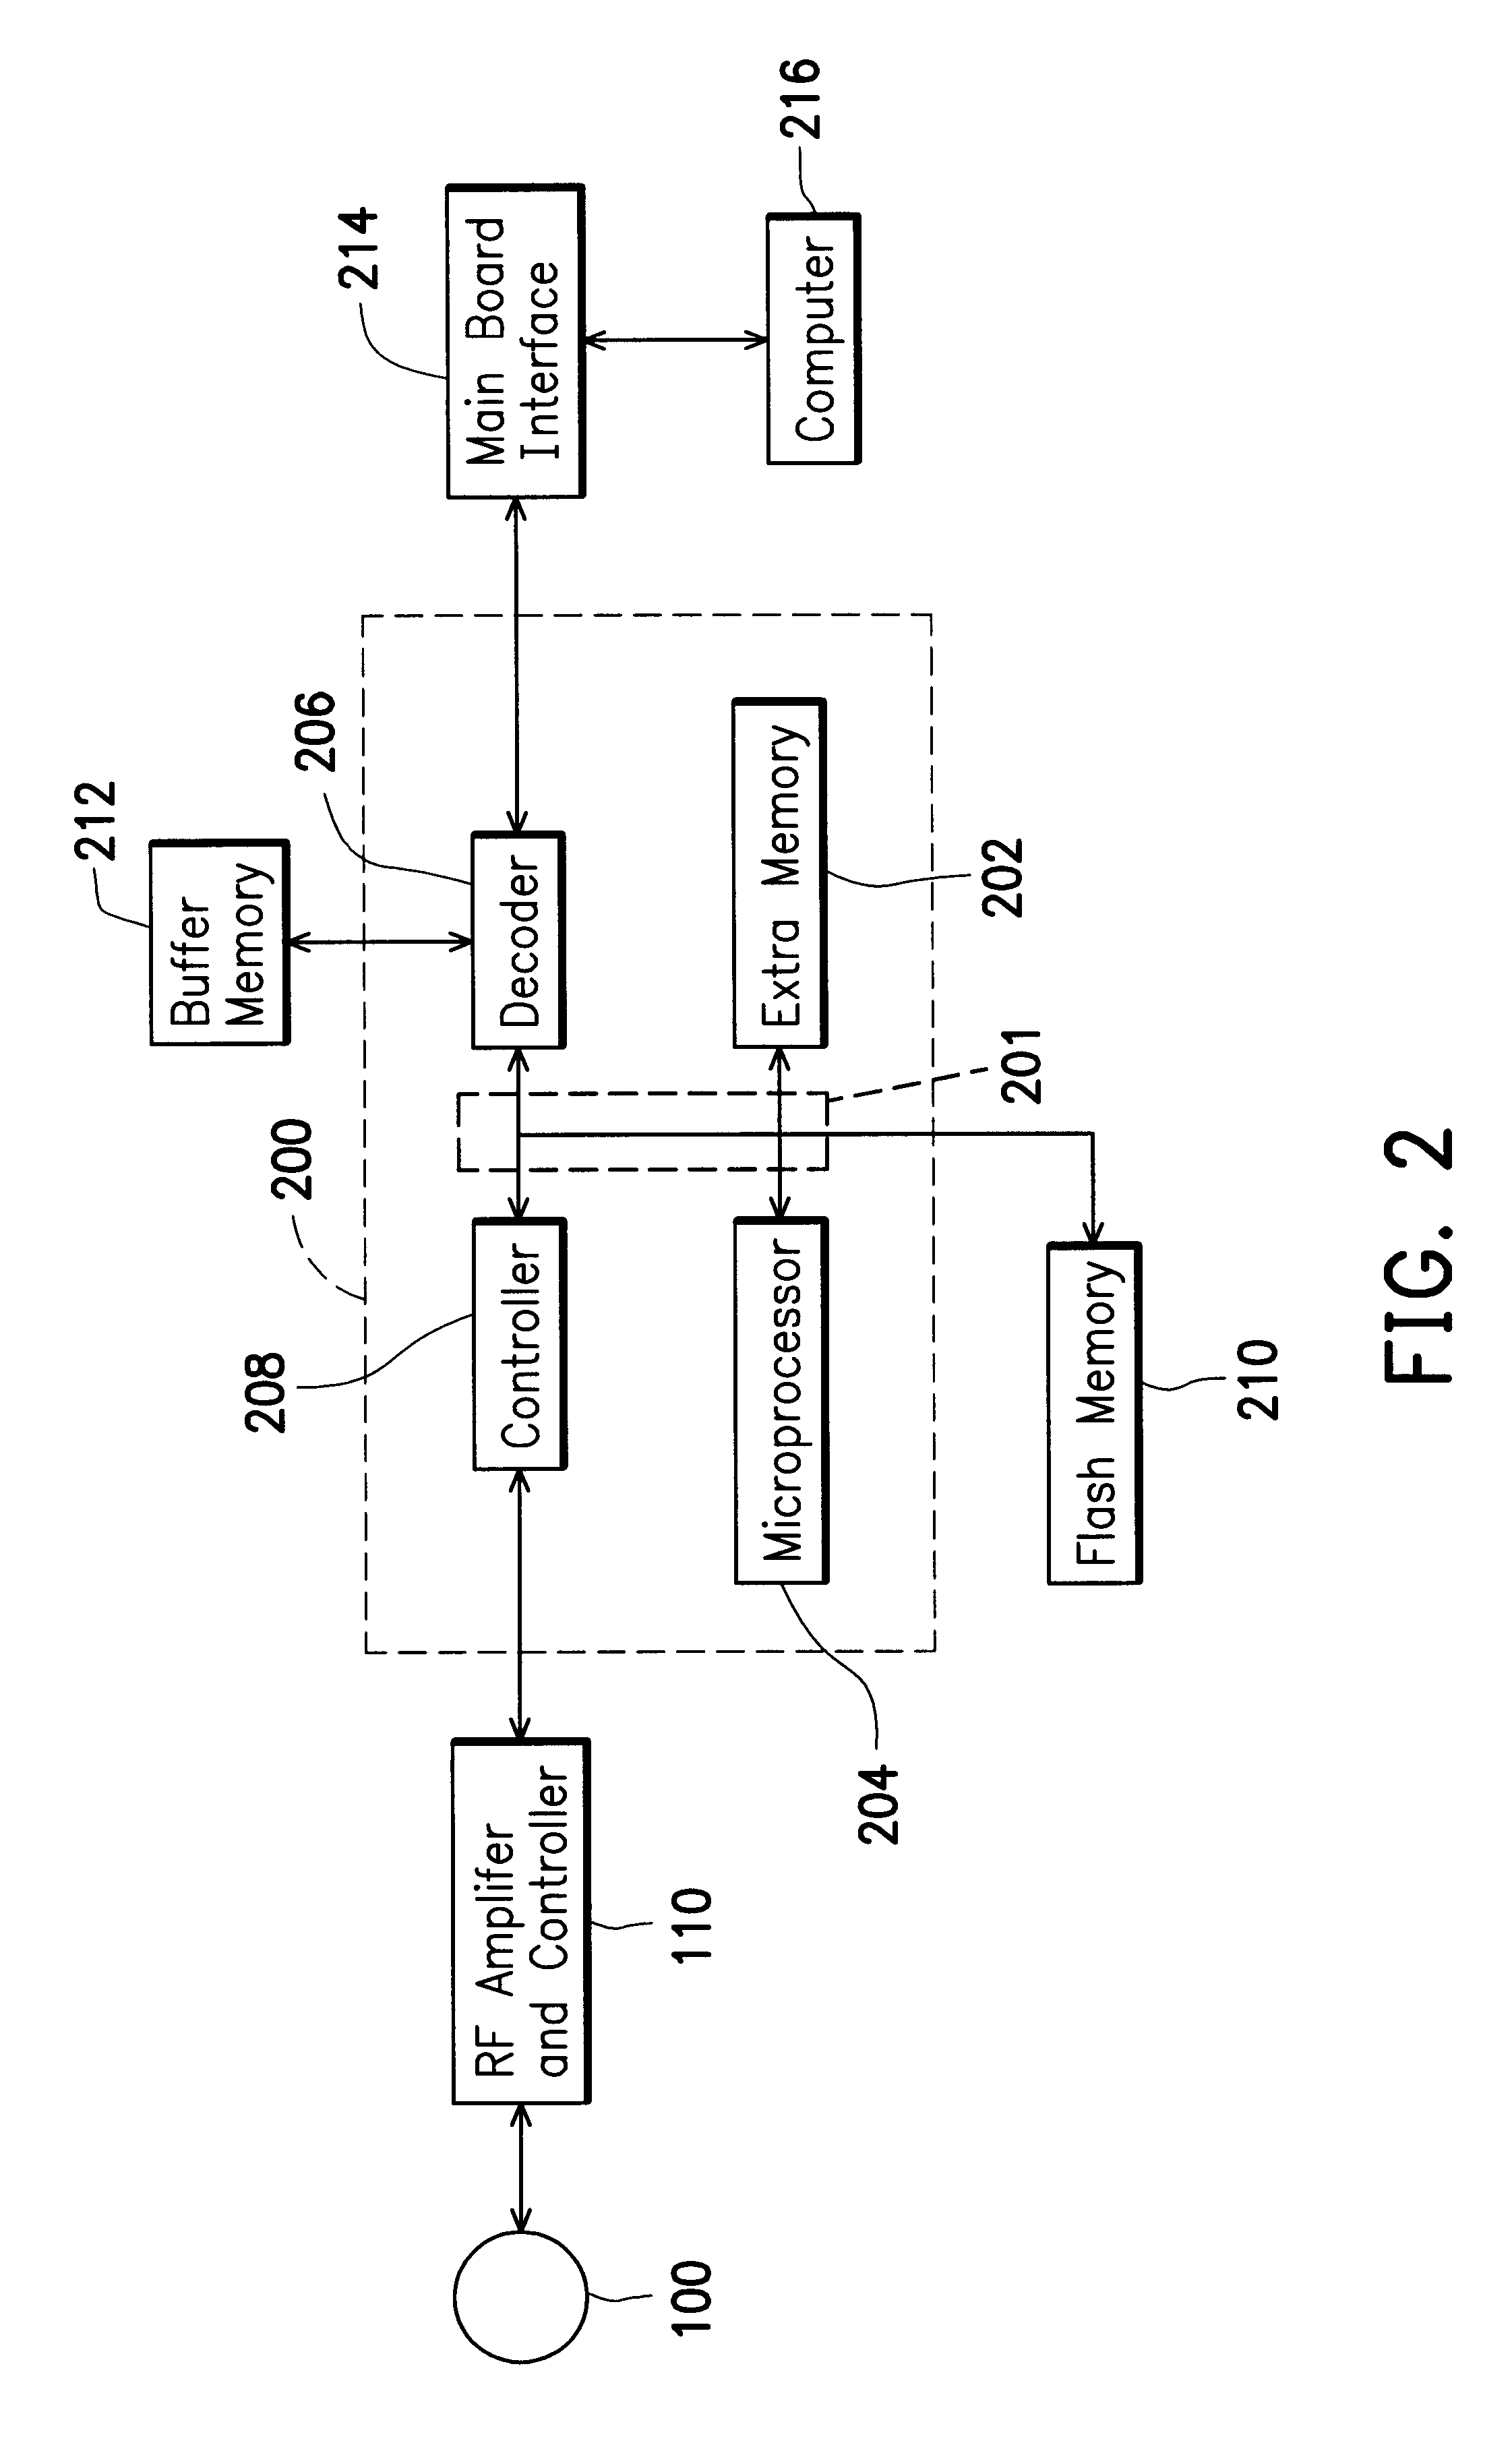 Method for controlling an optic disk